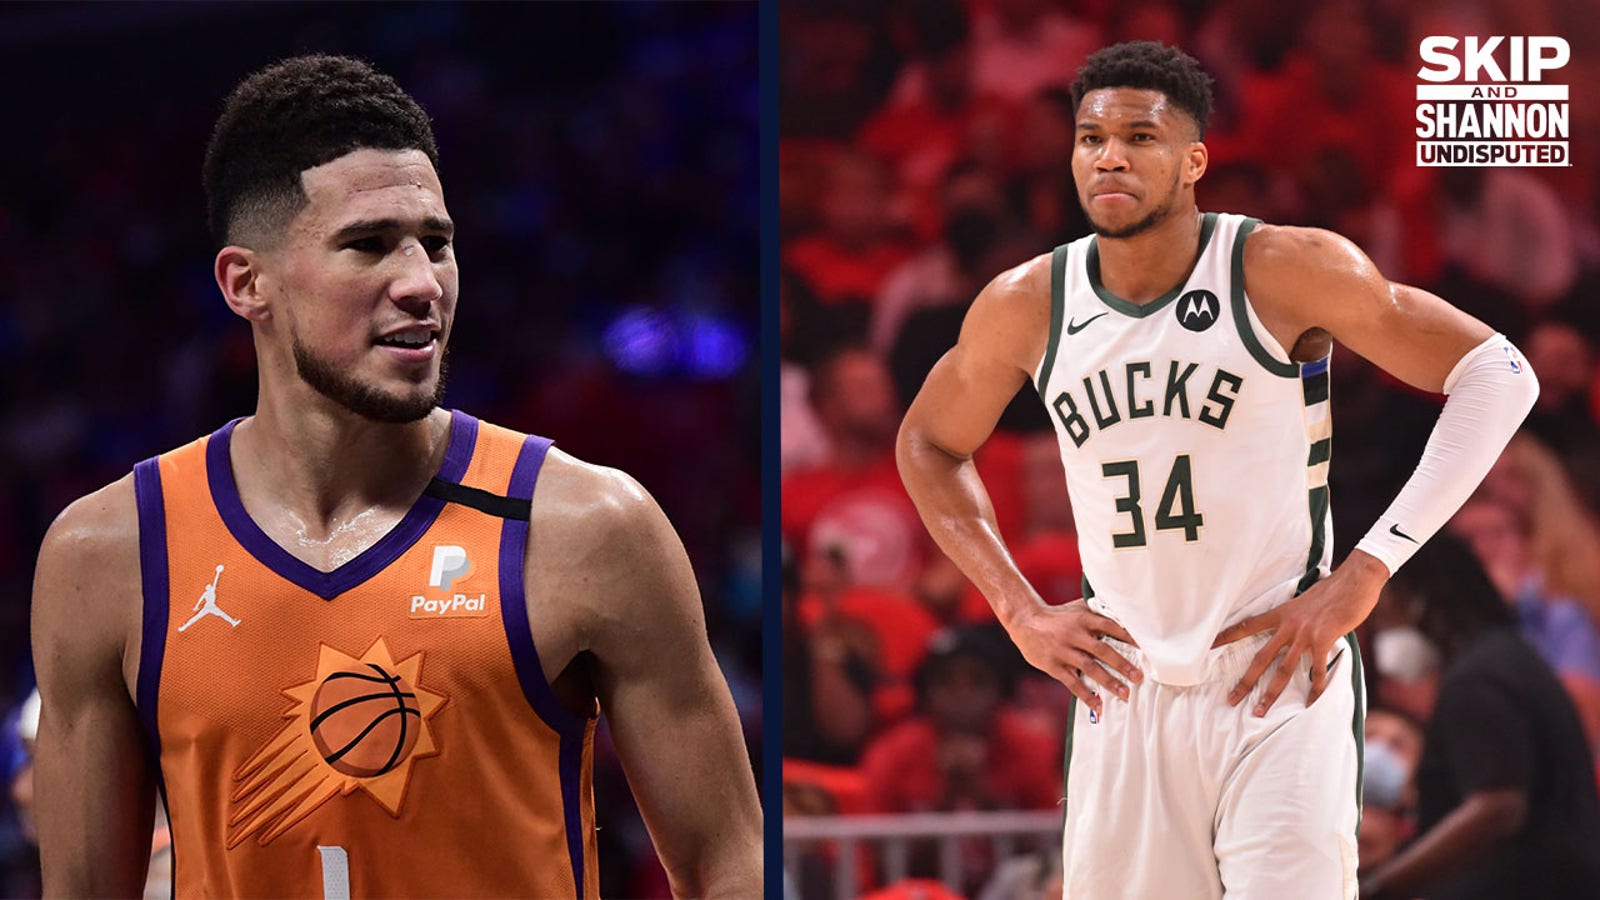 Chris Broussard: I'm picking the Suns, but the Bucks' odds to win the Finals depend on Giannis' health I UNDISPUTED